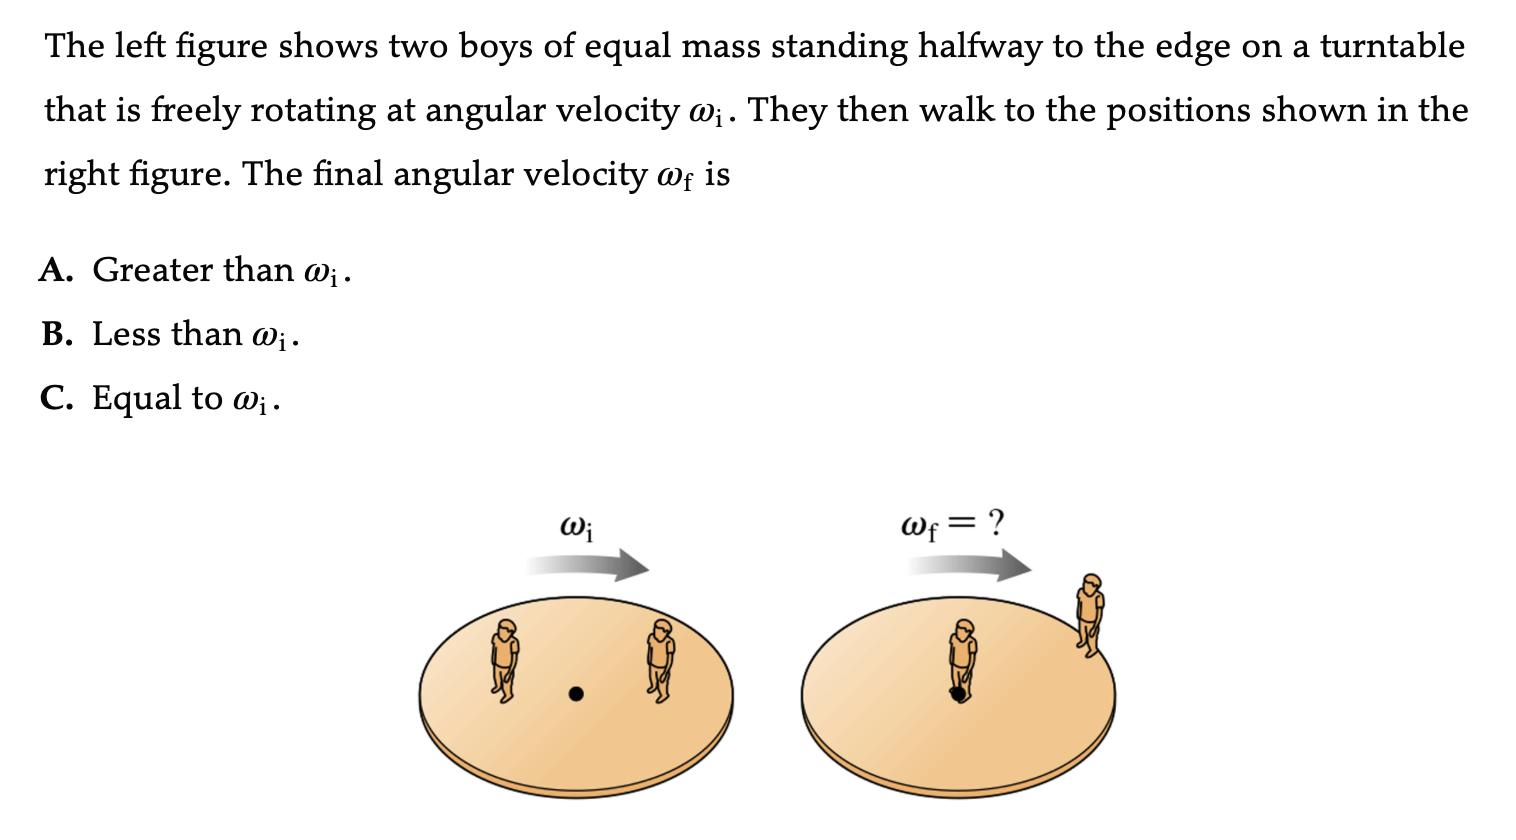 The left figure shows two boys of equal mass standing halfway to the edge on a turntable that is freely